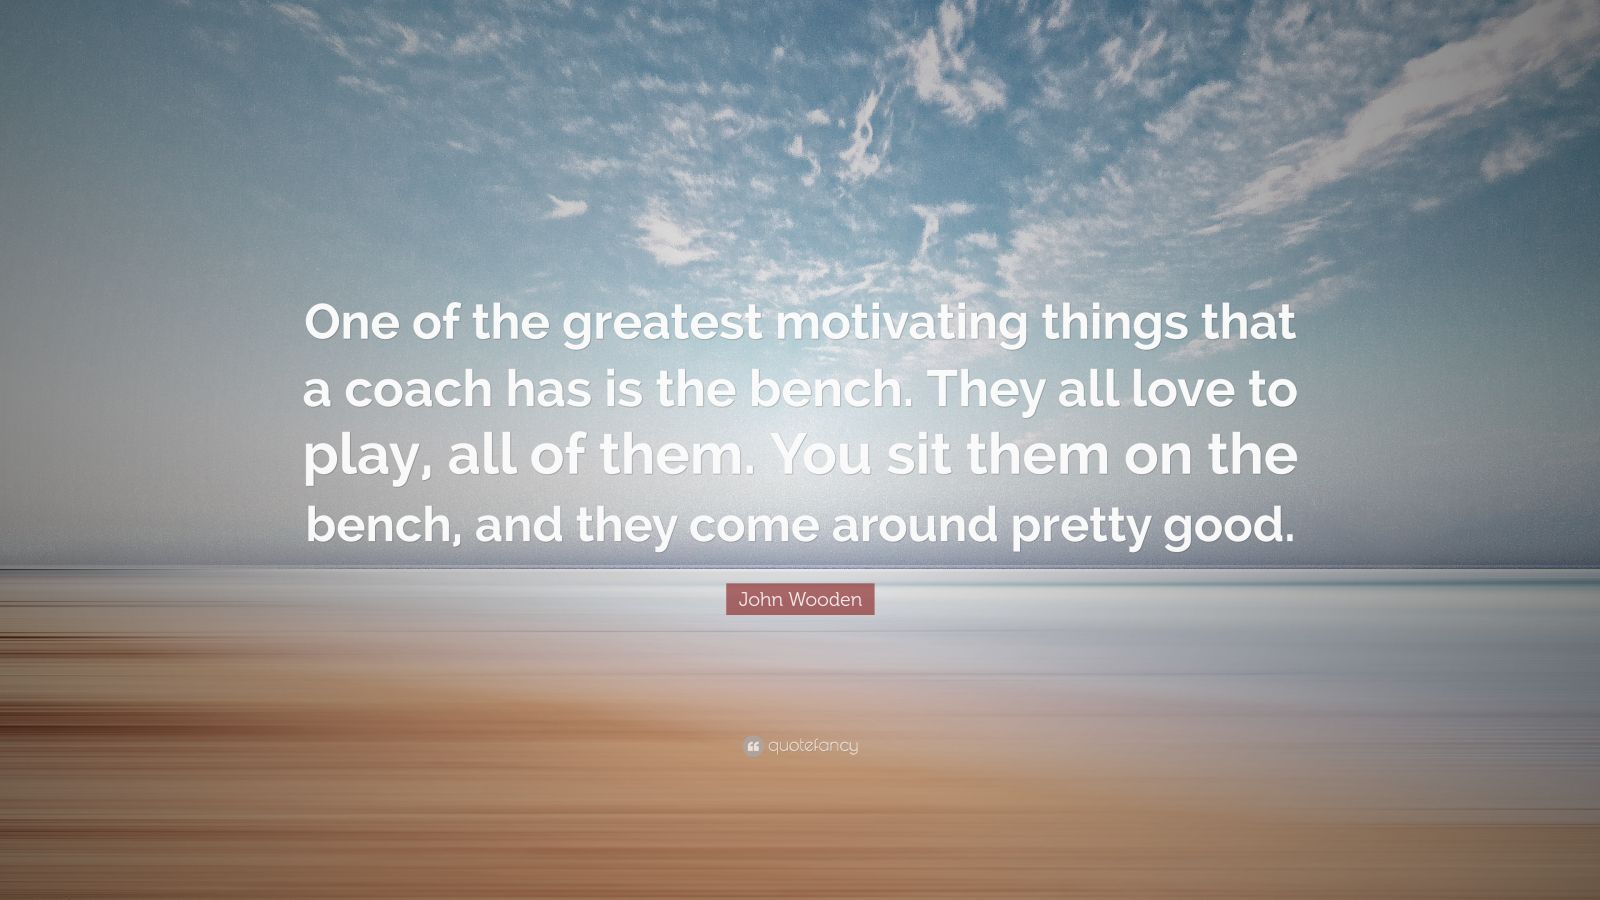 John Wooden Quote: “One of the greatest motivating things that a coach